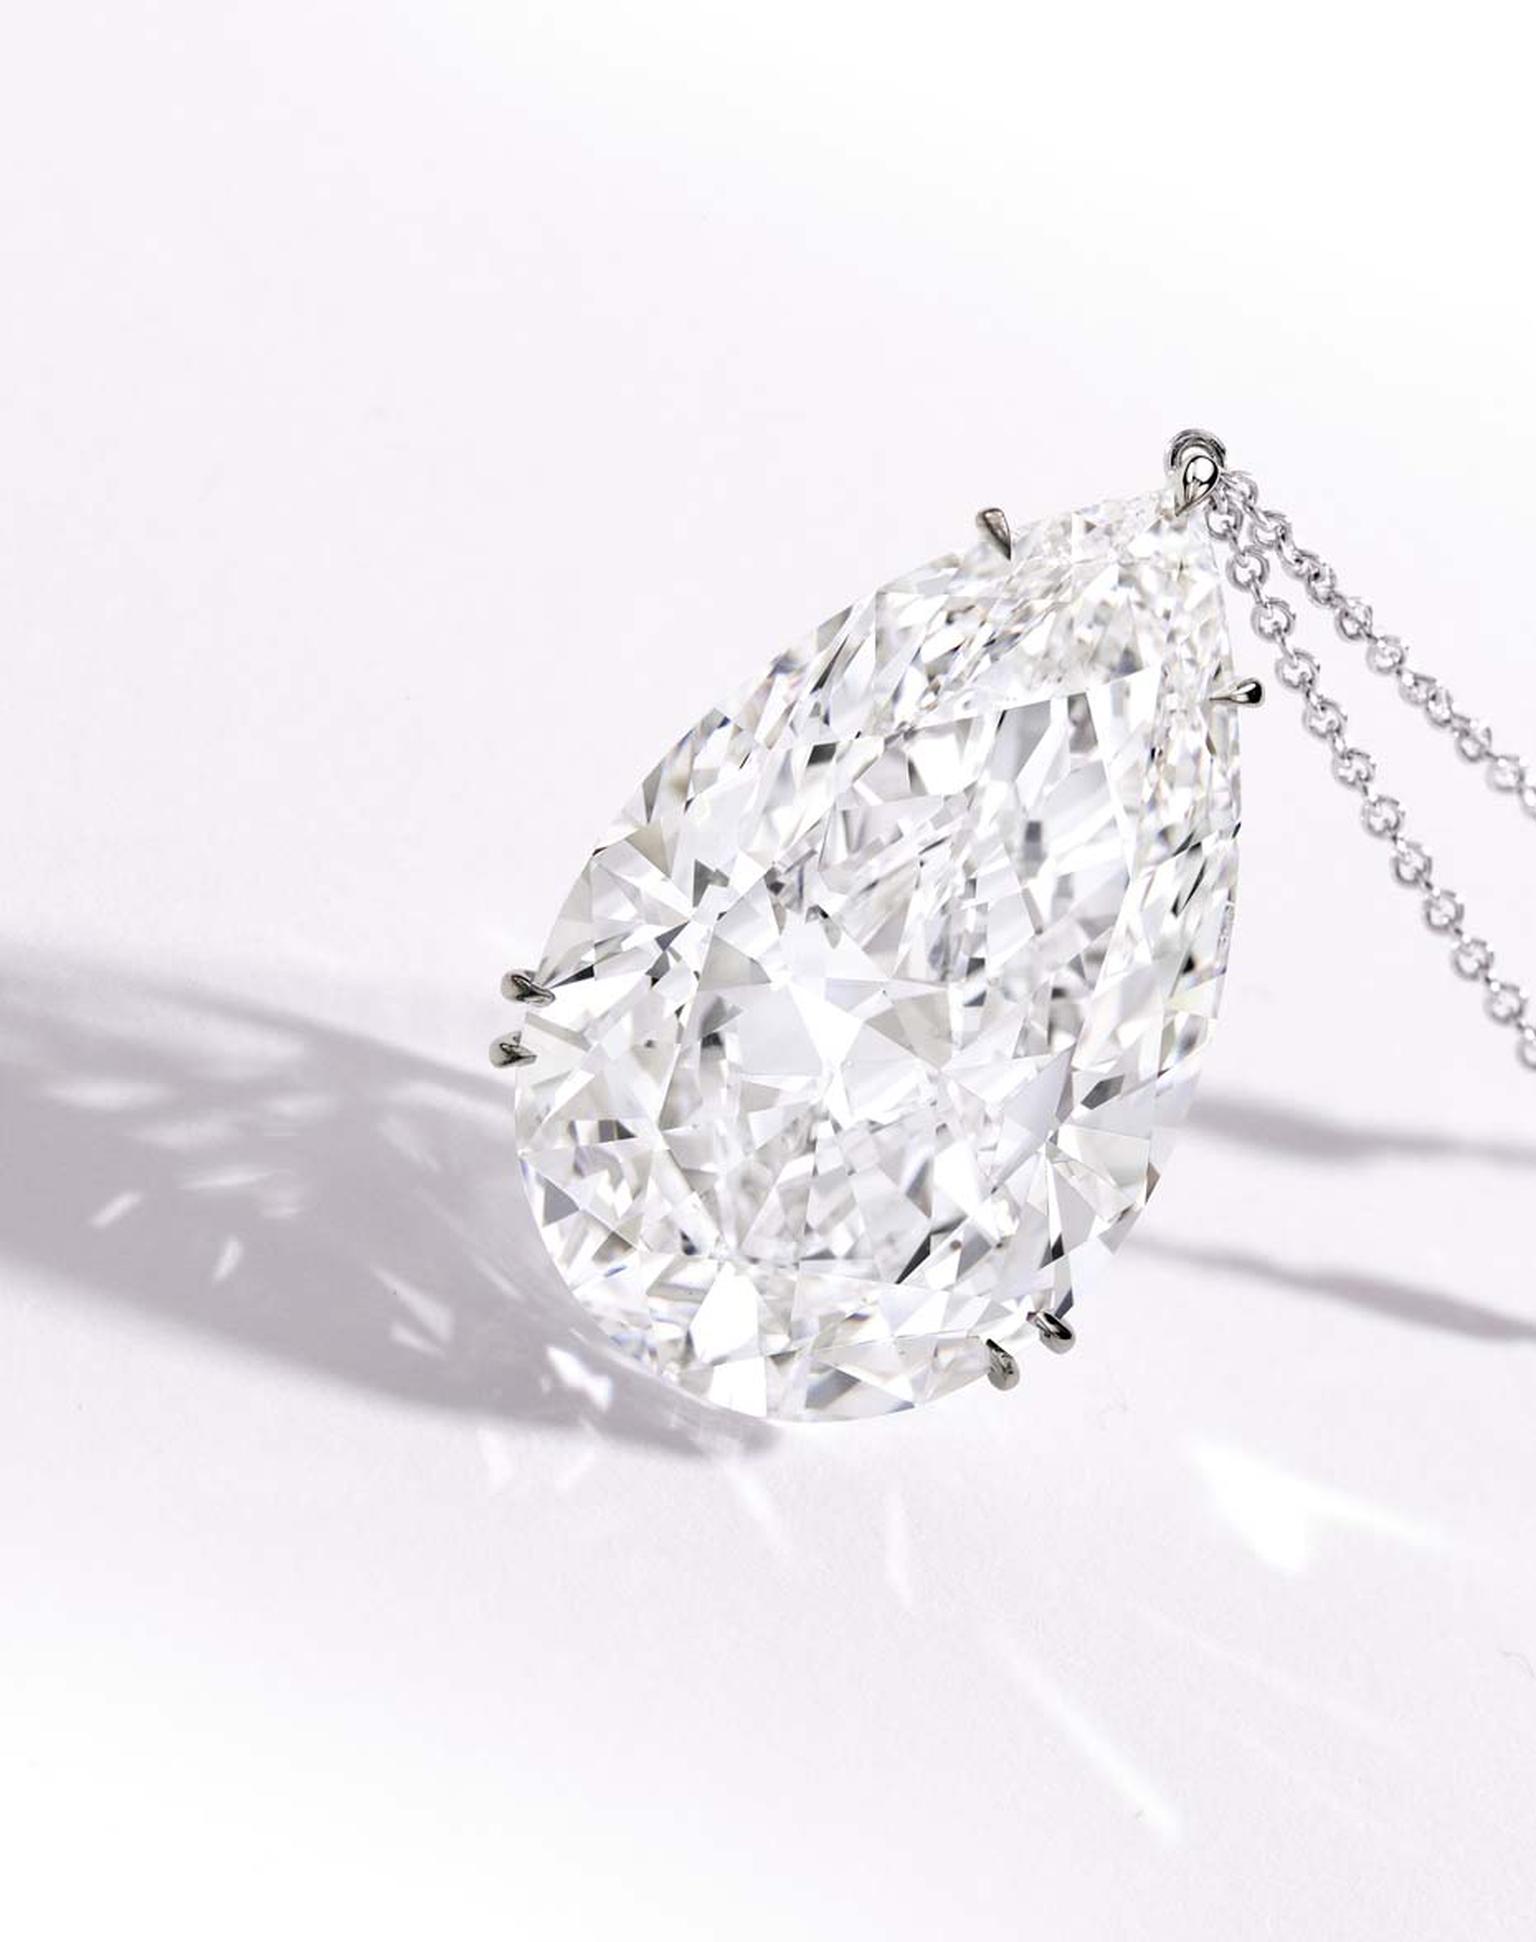 A highly important platinum and diamond high jewelry pendant necklace, from which is suspended a 52.26ct pear-shaped diamond with excellent polish and symmetry, has an estimate of $3.8-4.2 million.